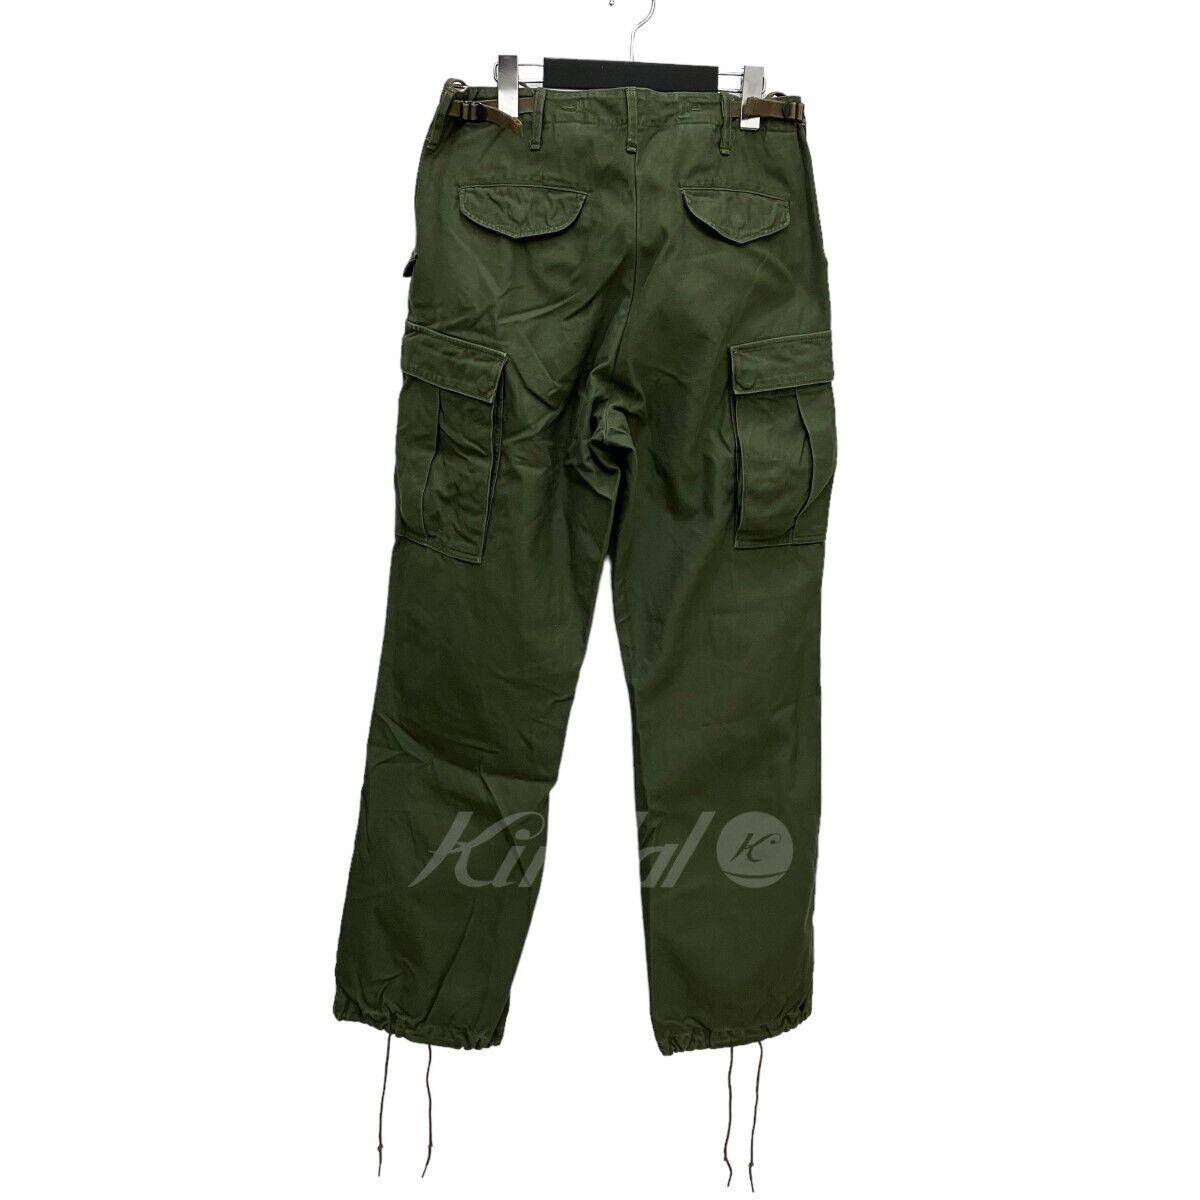 Used The Real Mccoy S Cargo Pants - image 4